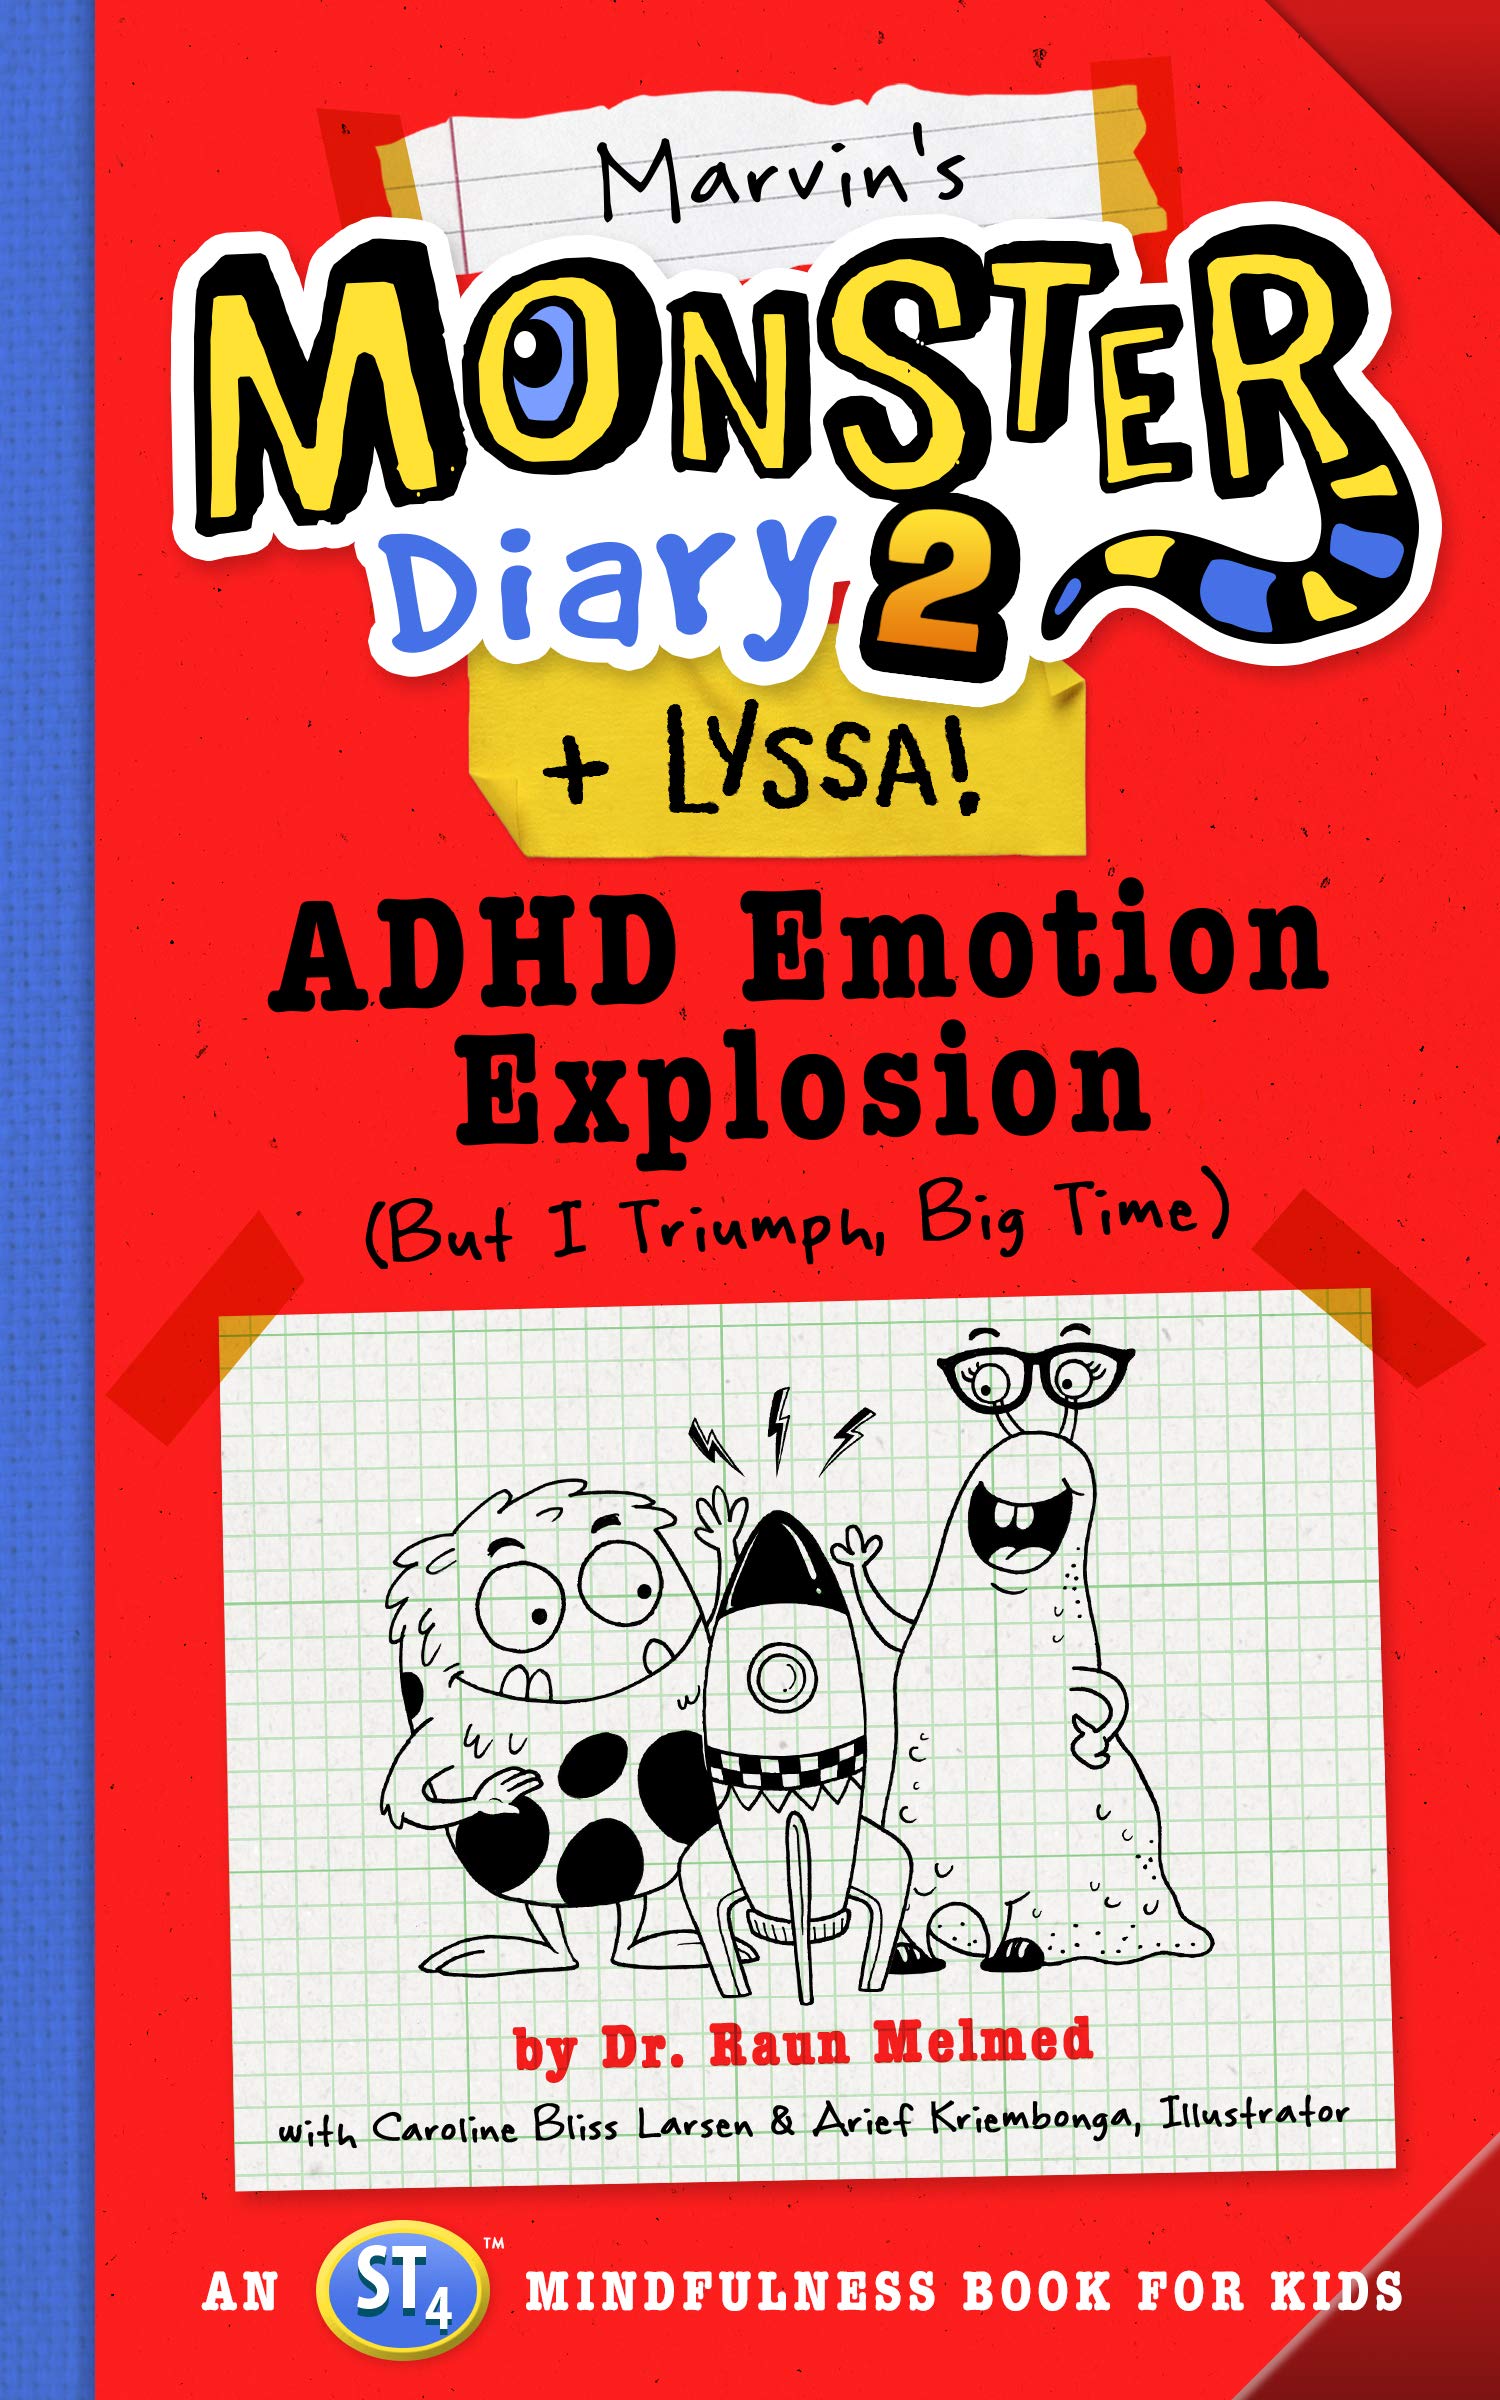 Marvin's Monster Diary 2 (+ Lyssa): ADHD Emotion Explosion (But I Triumph, Big Time)